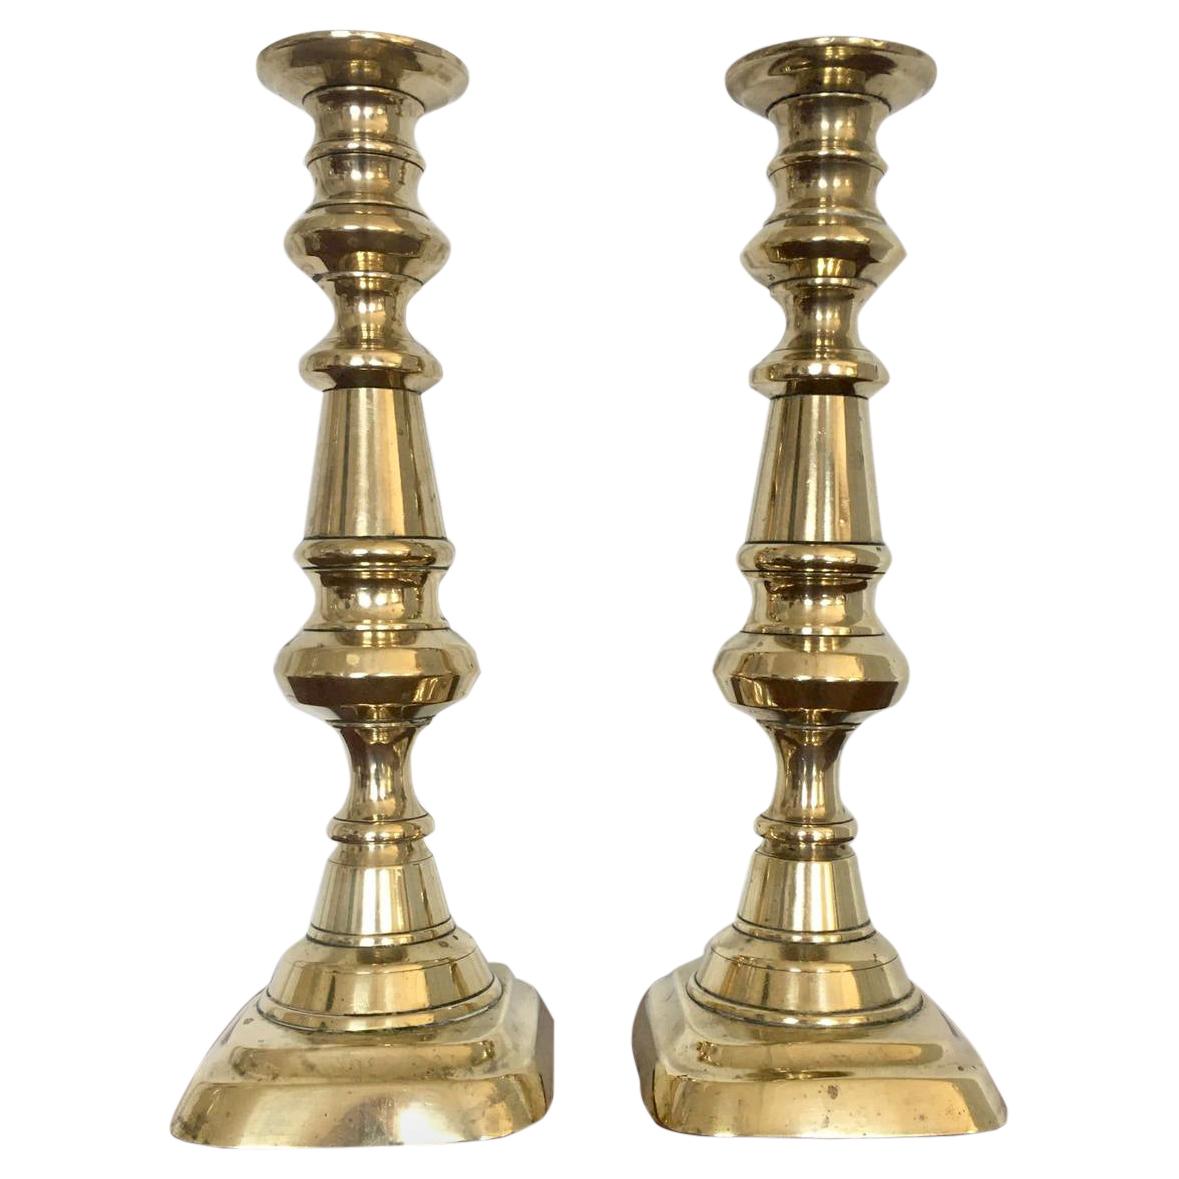 Antique 19th Century Pair of Extra Tall Brass Candlesticks